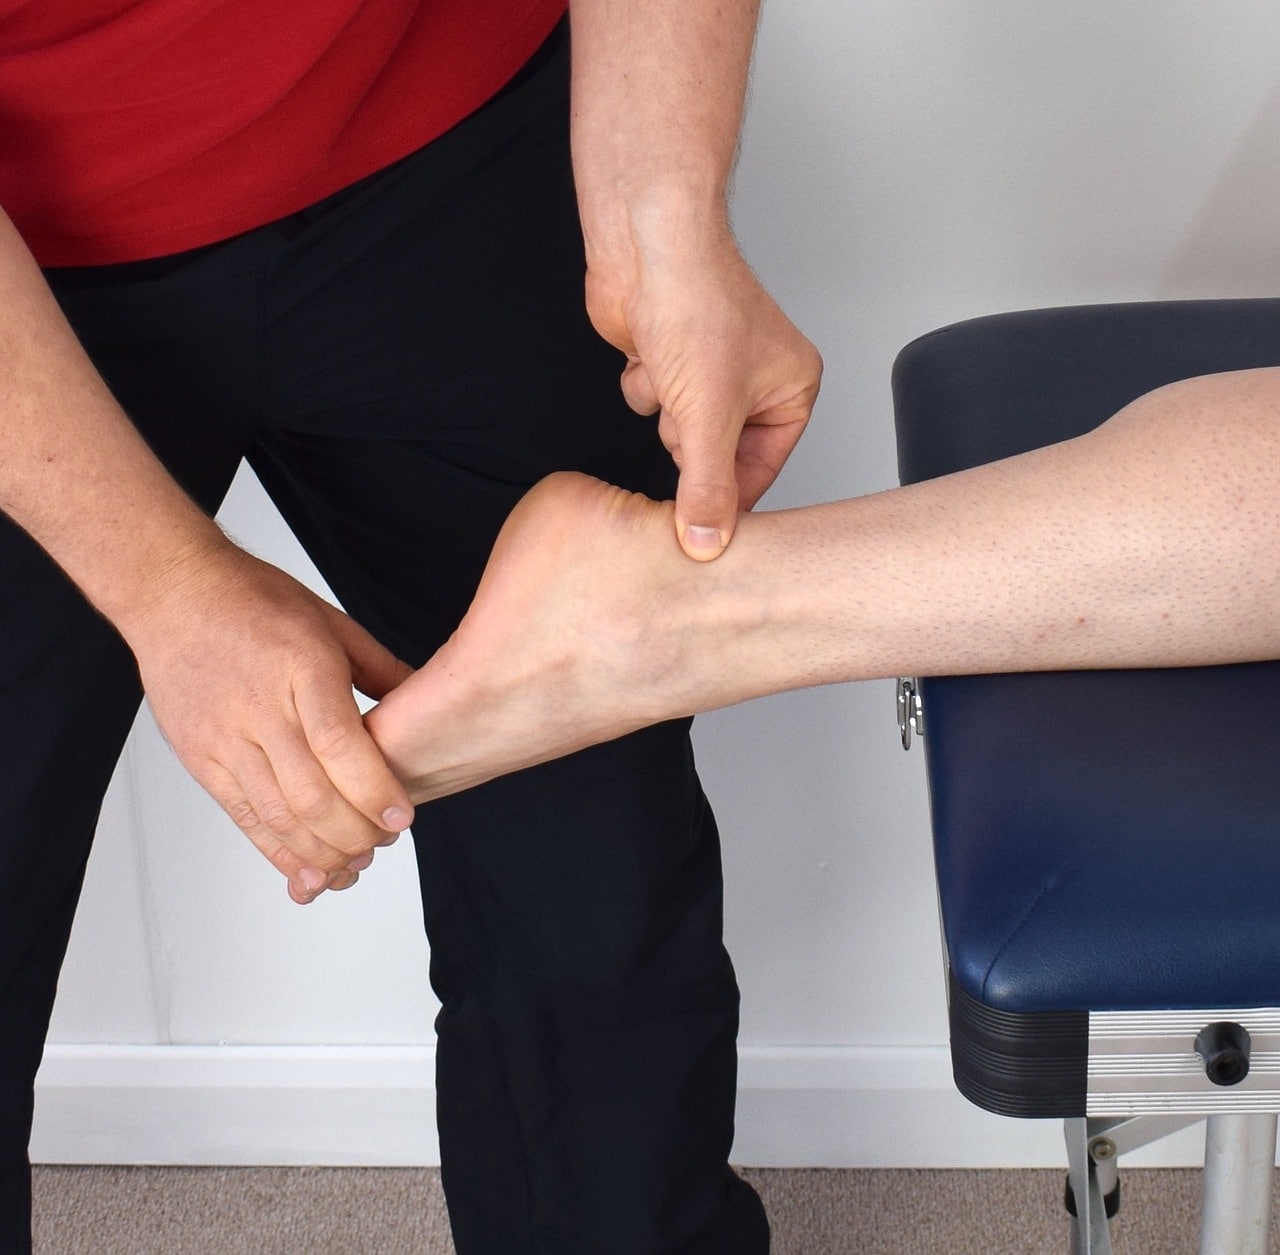 Ankle Mobility: Why is it important? - Symmetry Physical Therapy